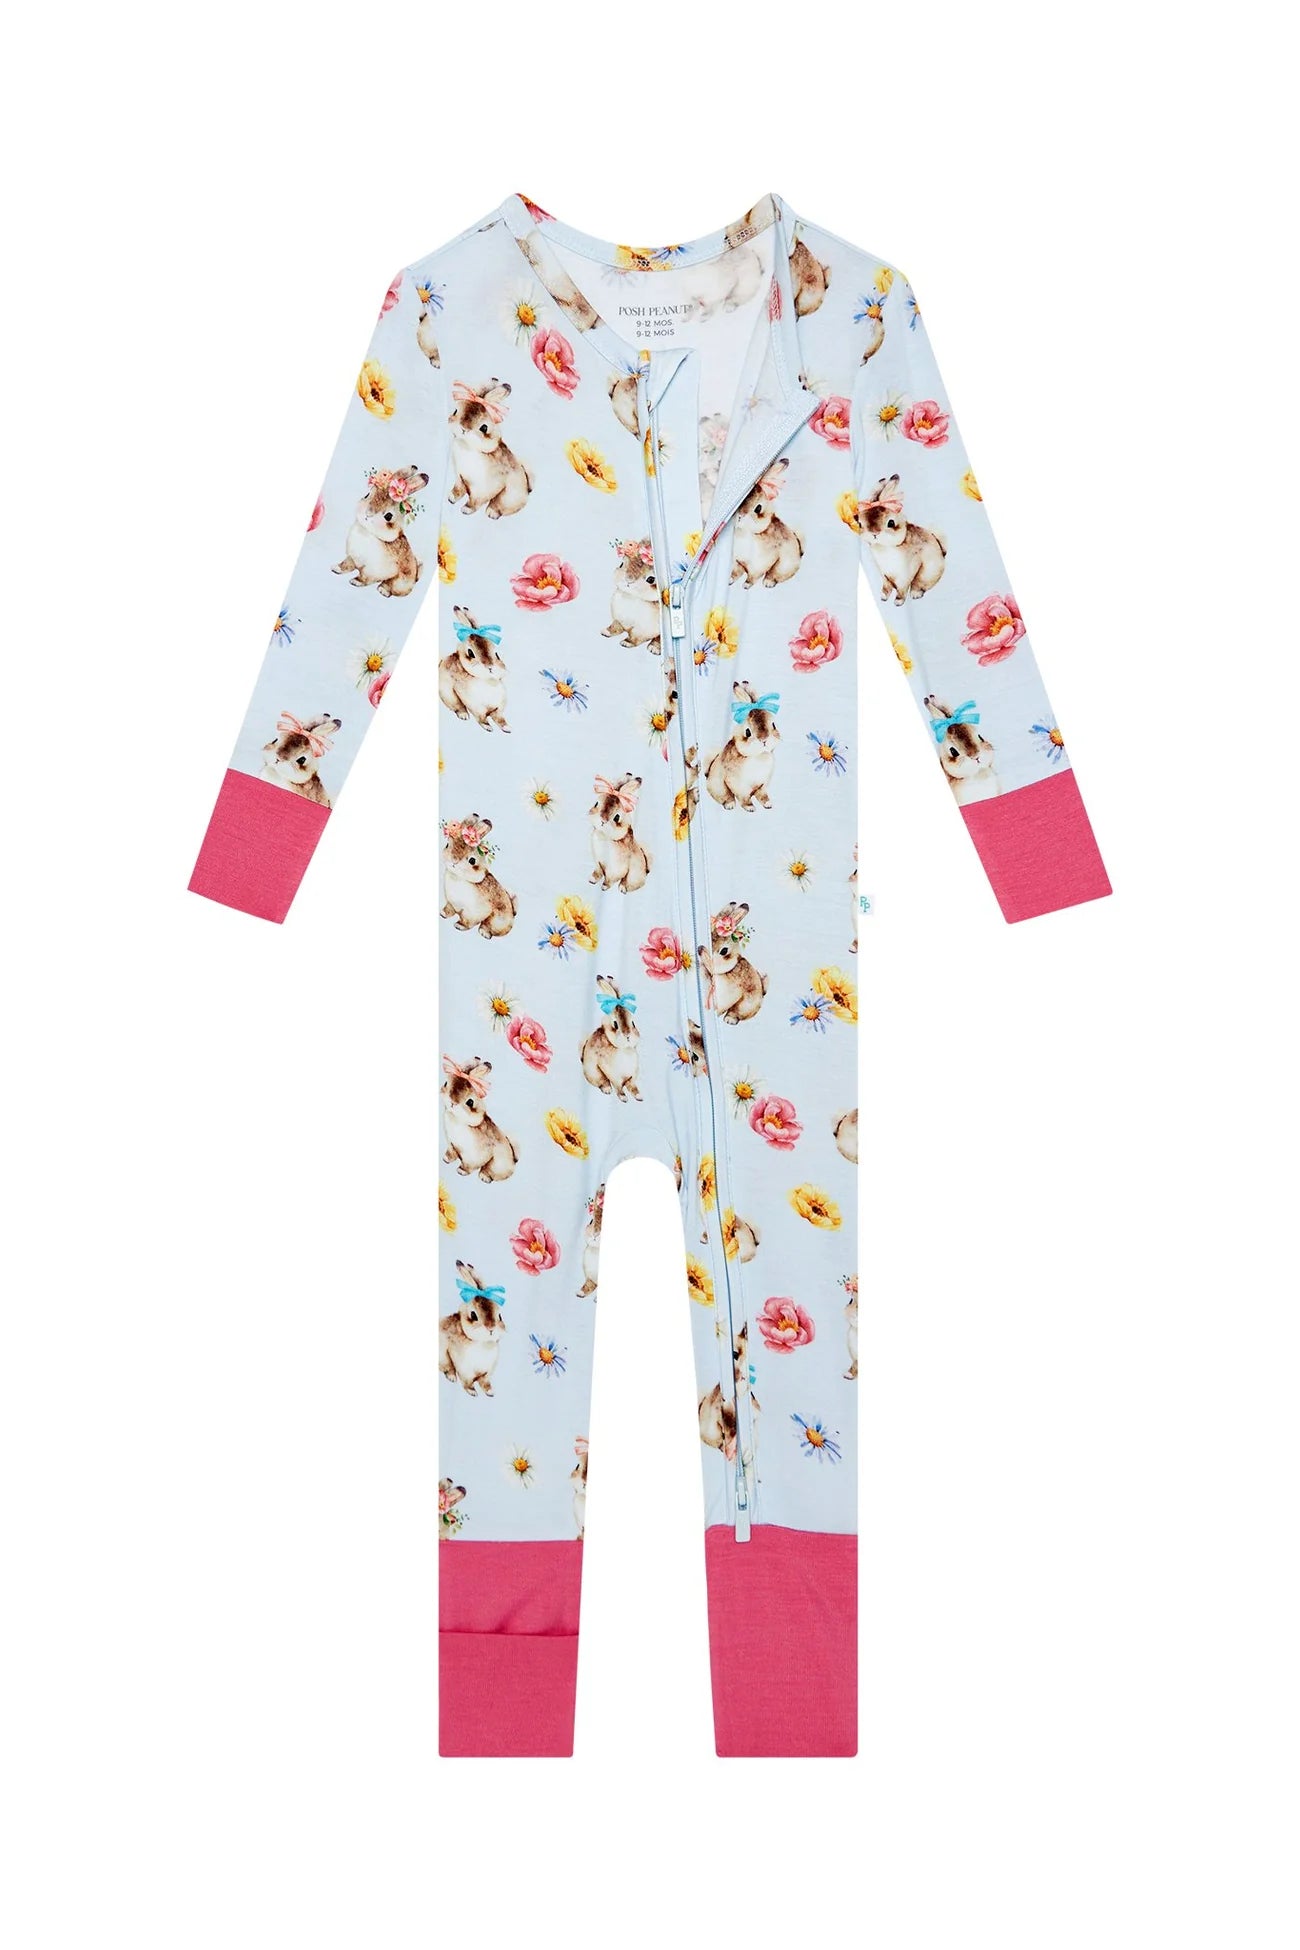 Posh Peanut Convertible One Piece - Clemence  Let Them Be Little, A Baby &  Children's Clothing Boutique